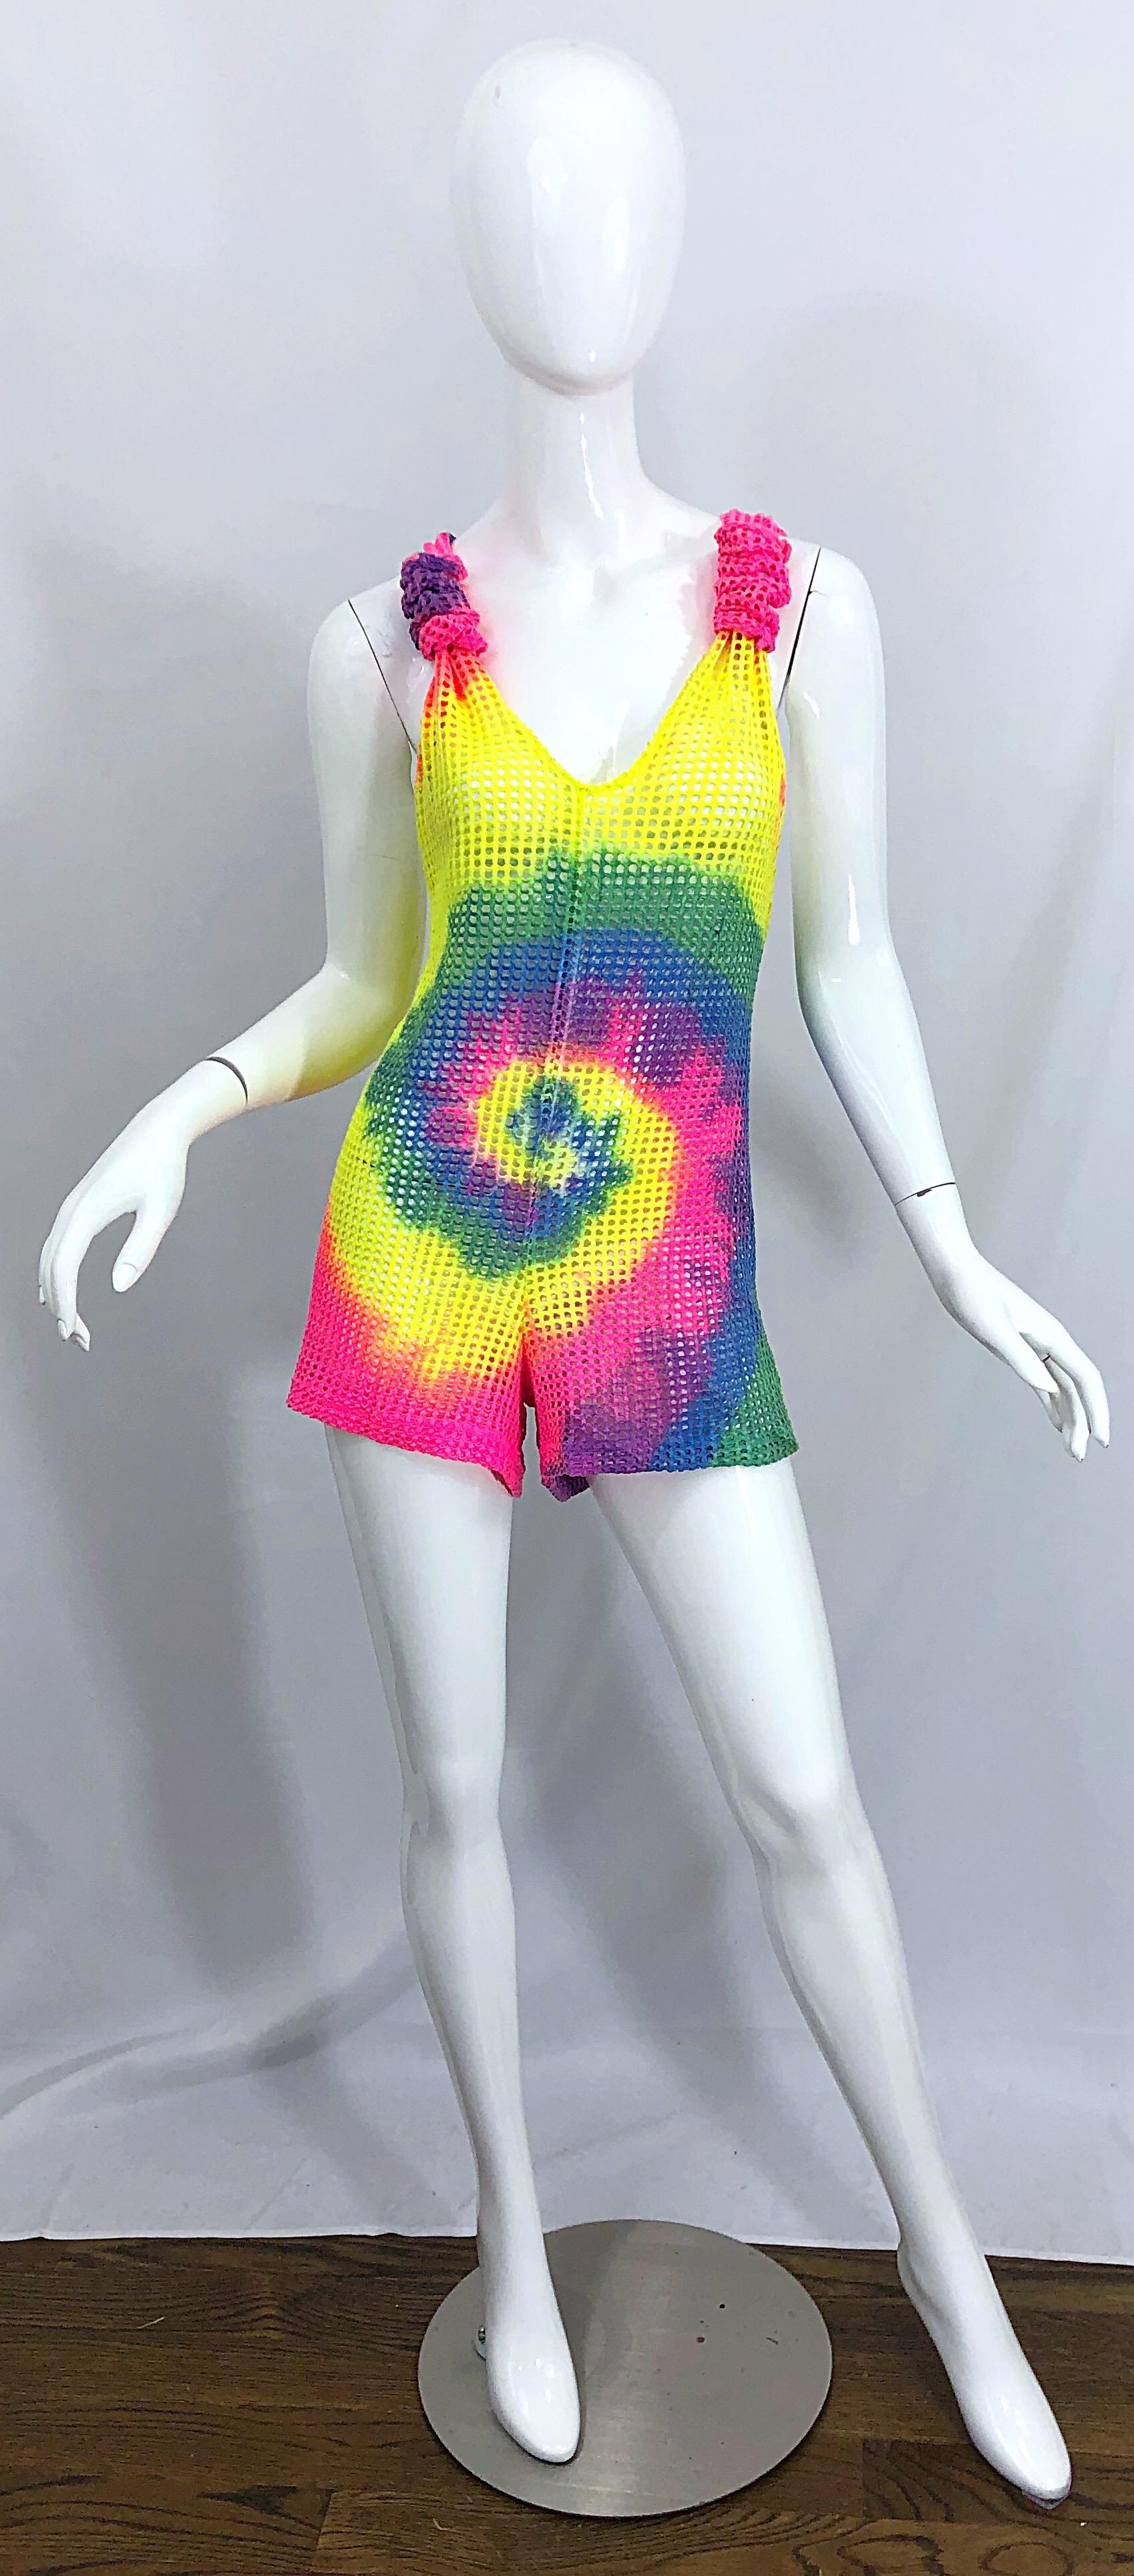 Amazing vintage mid 80s tie dyed bright colorful fishnet cut-out romper! Features bright colors in vibrant hues of hot pink, blue, purple, green, and neon highlighter yellow throughout. Flattering racerback style. Simply step into this and go. In